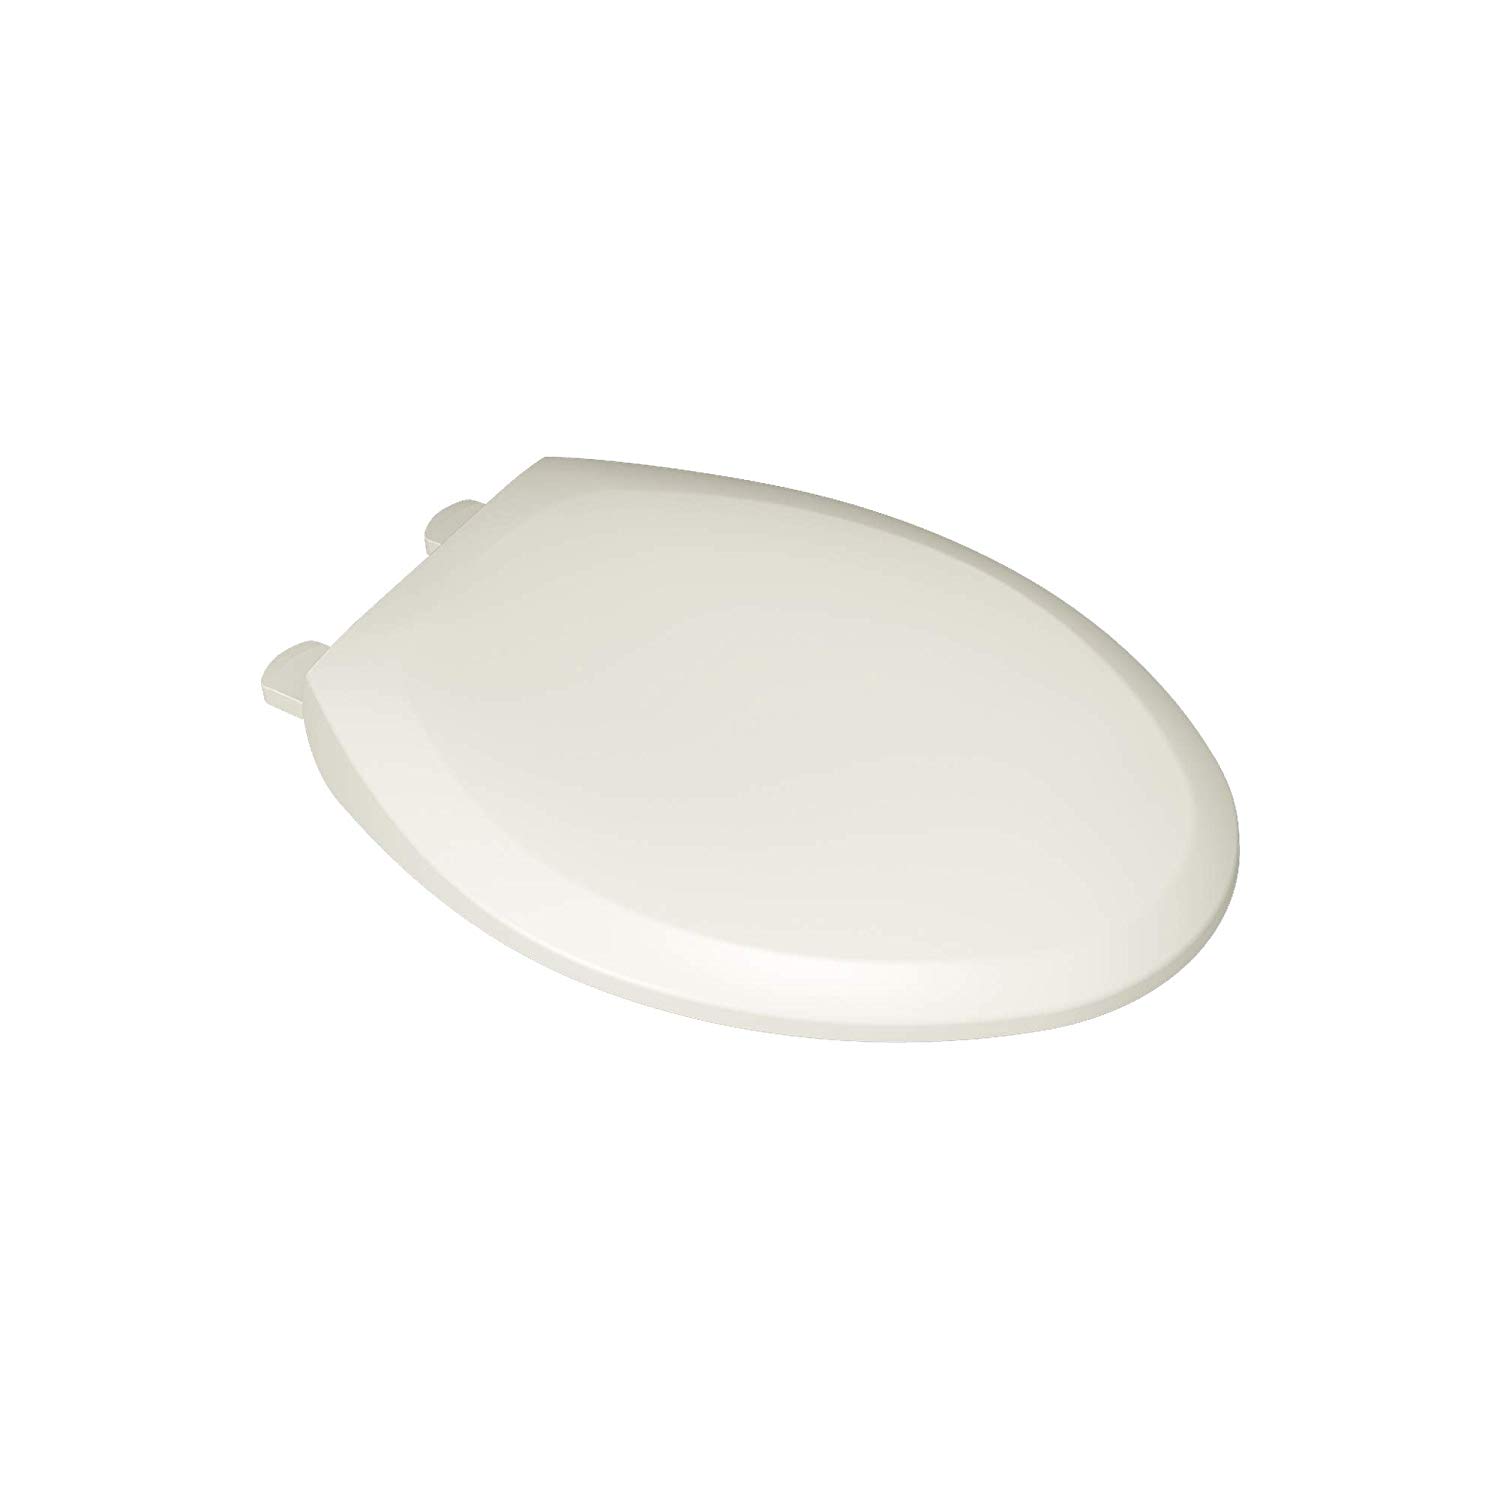 Champion Slow-Close Elongated Front Toilet Seat in Linen